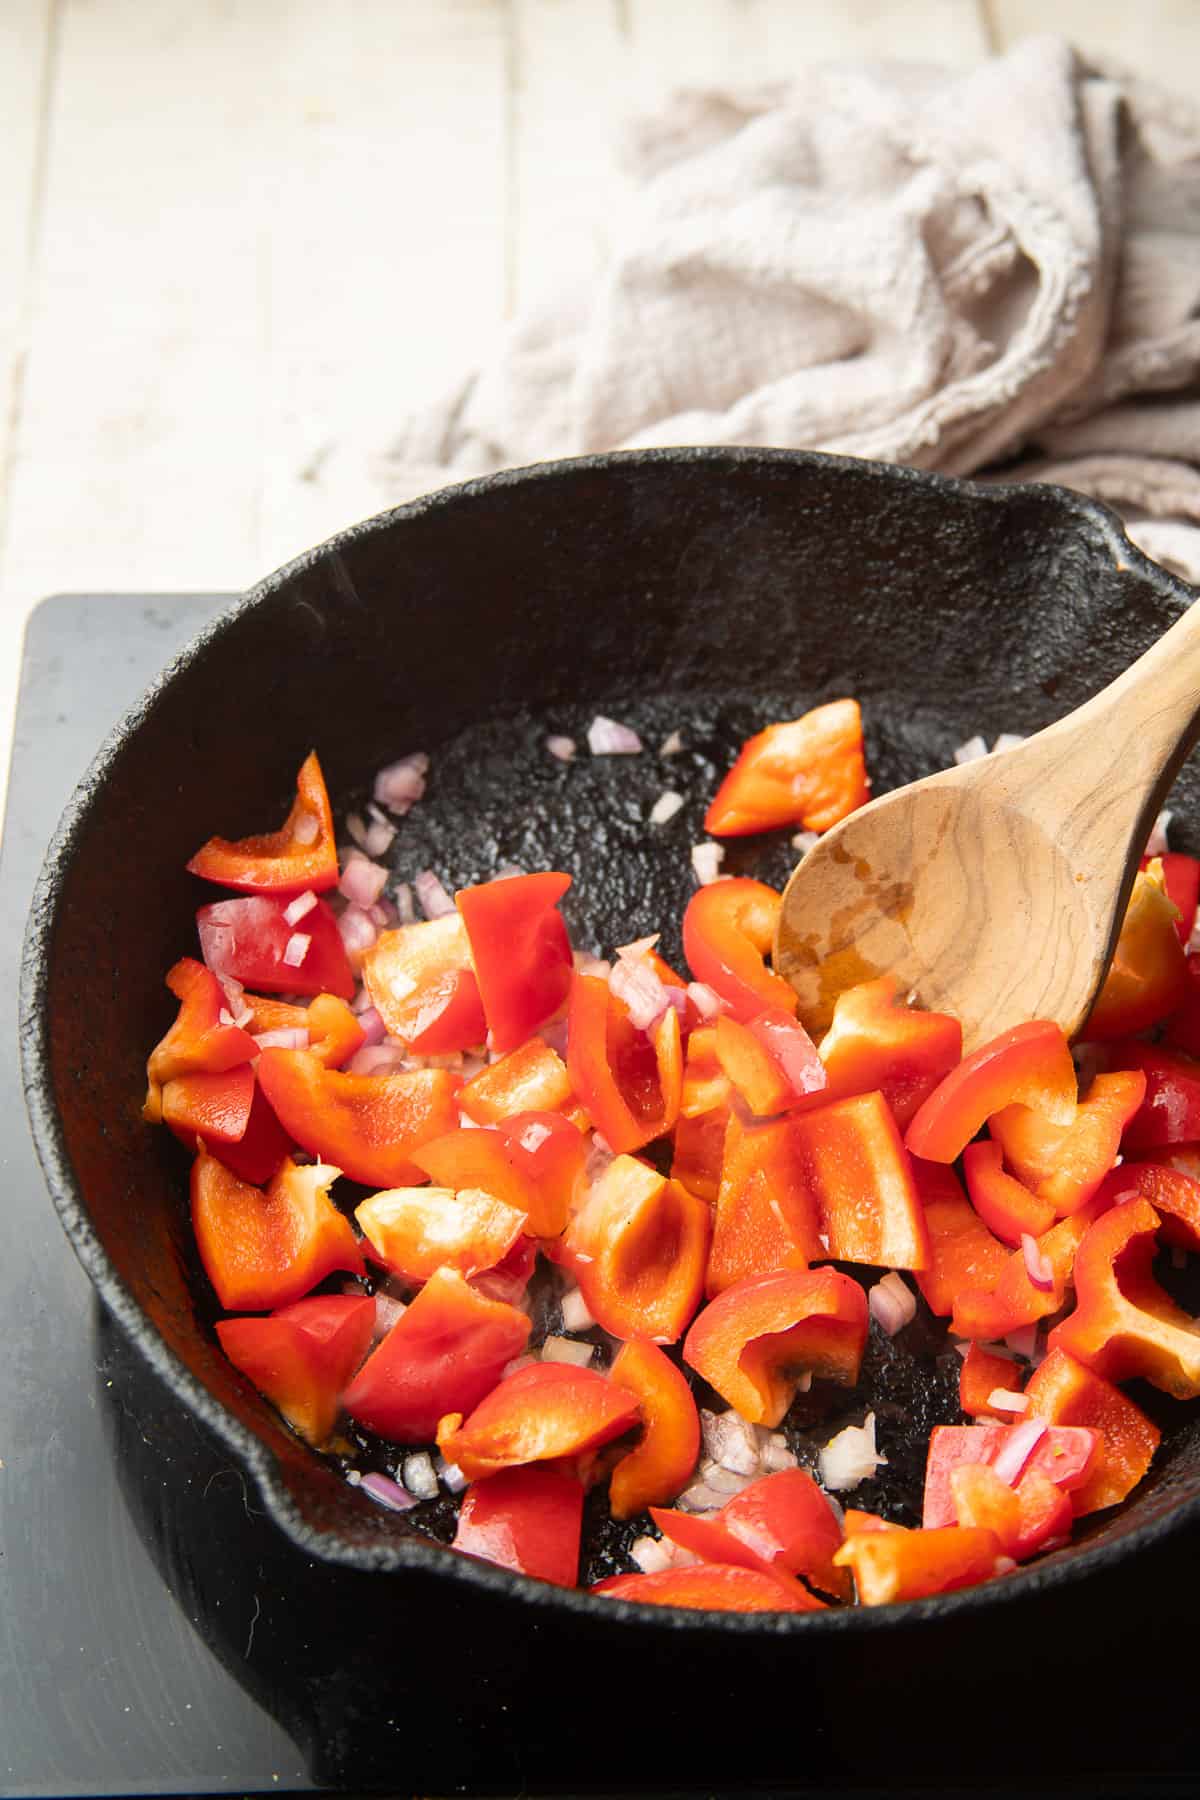 Diced bell pepper and shallots cooking in a cast iron skillet.